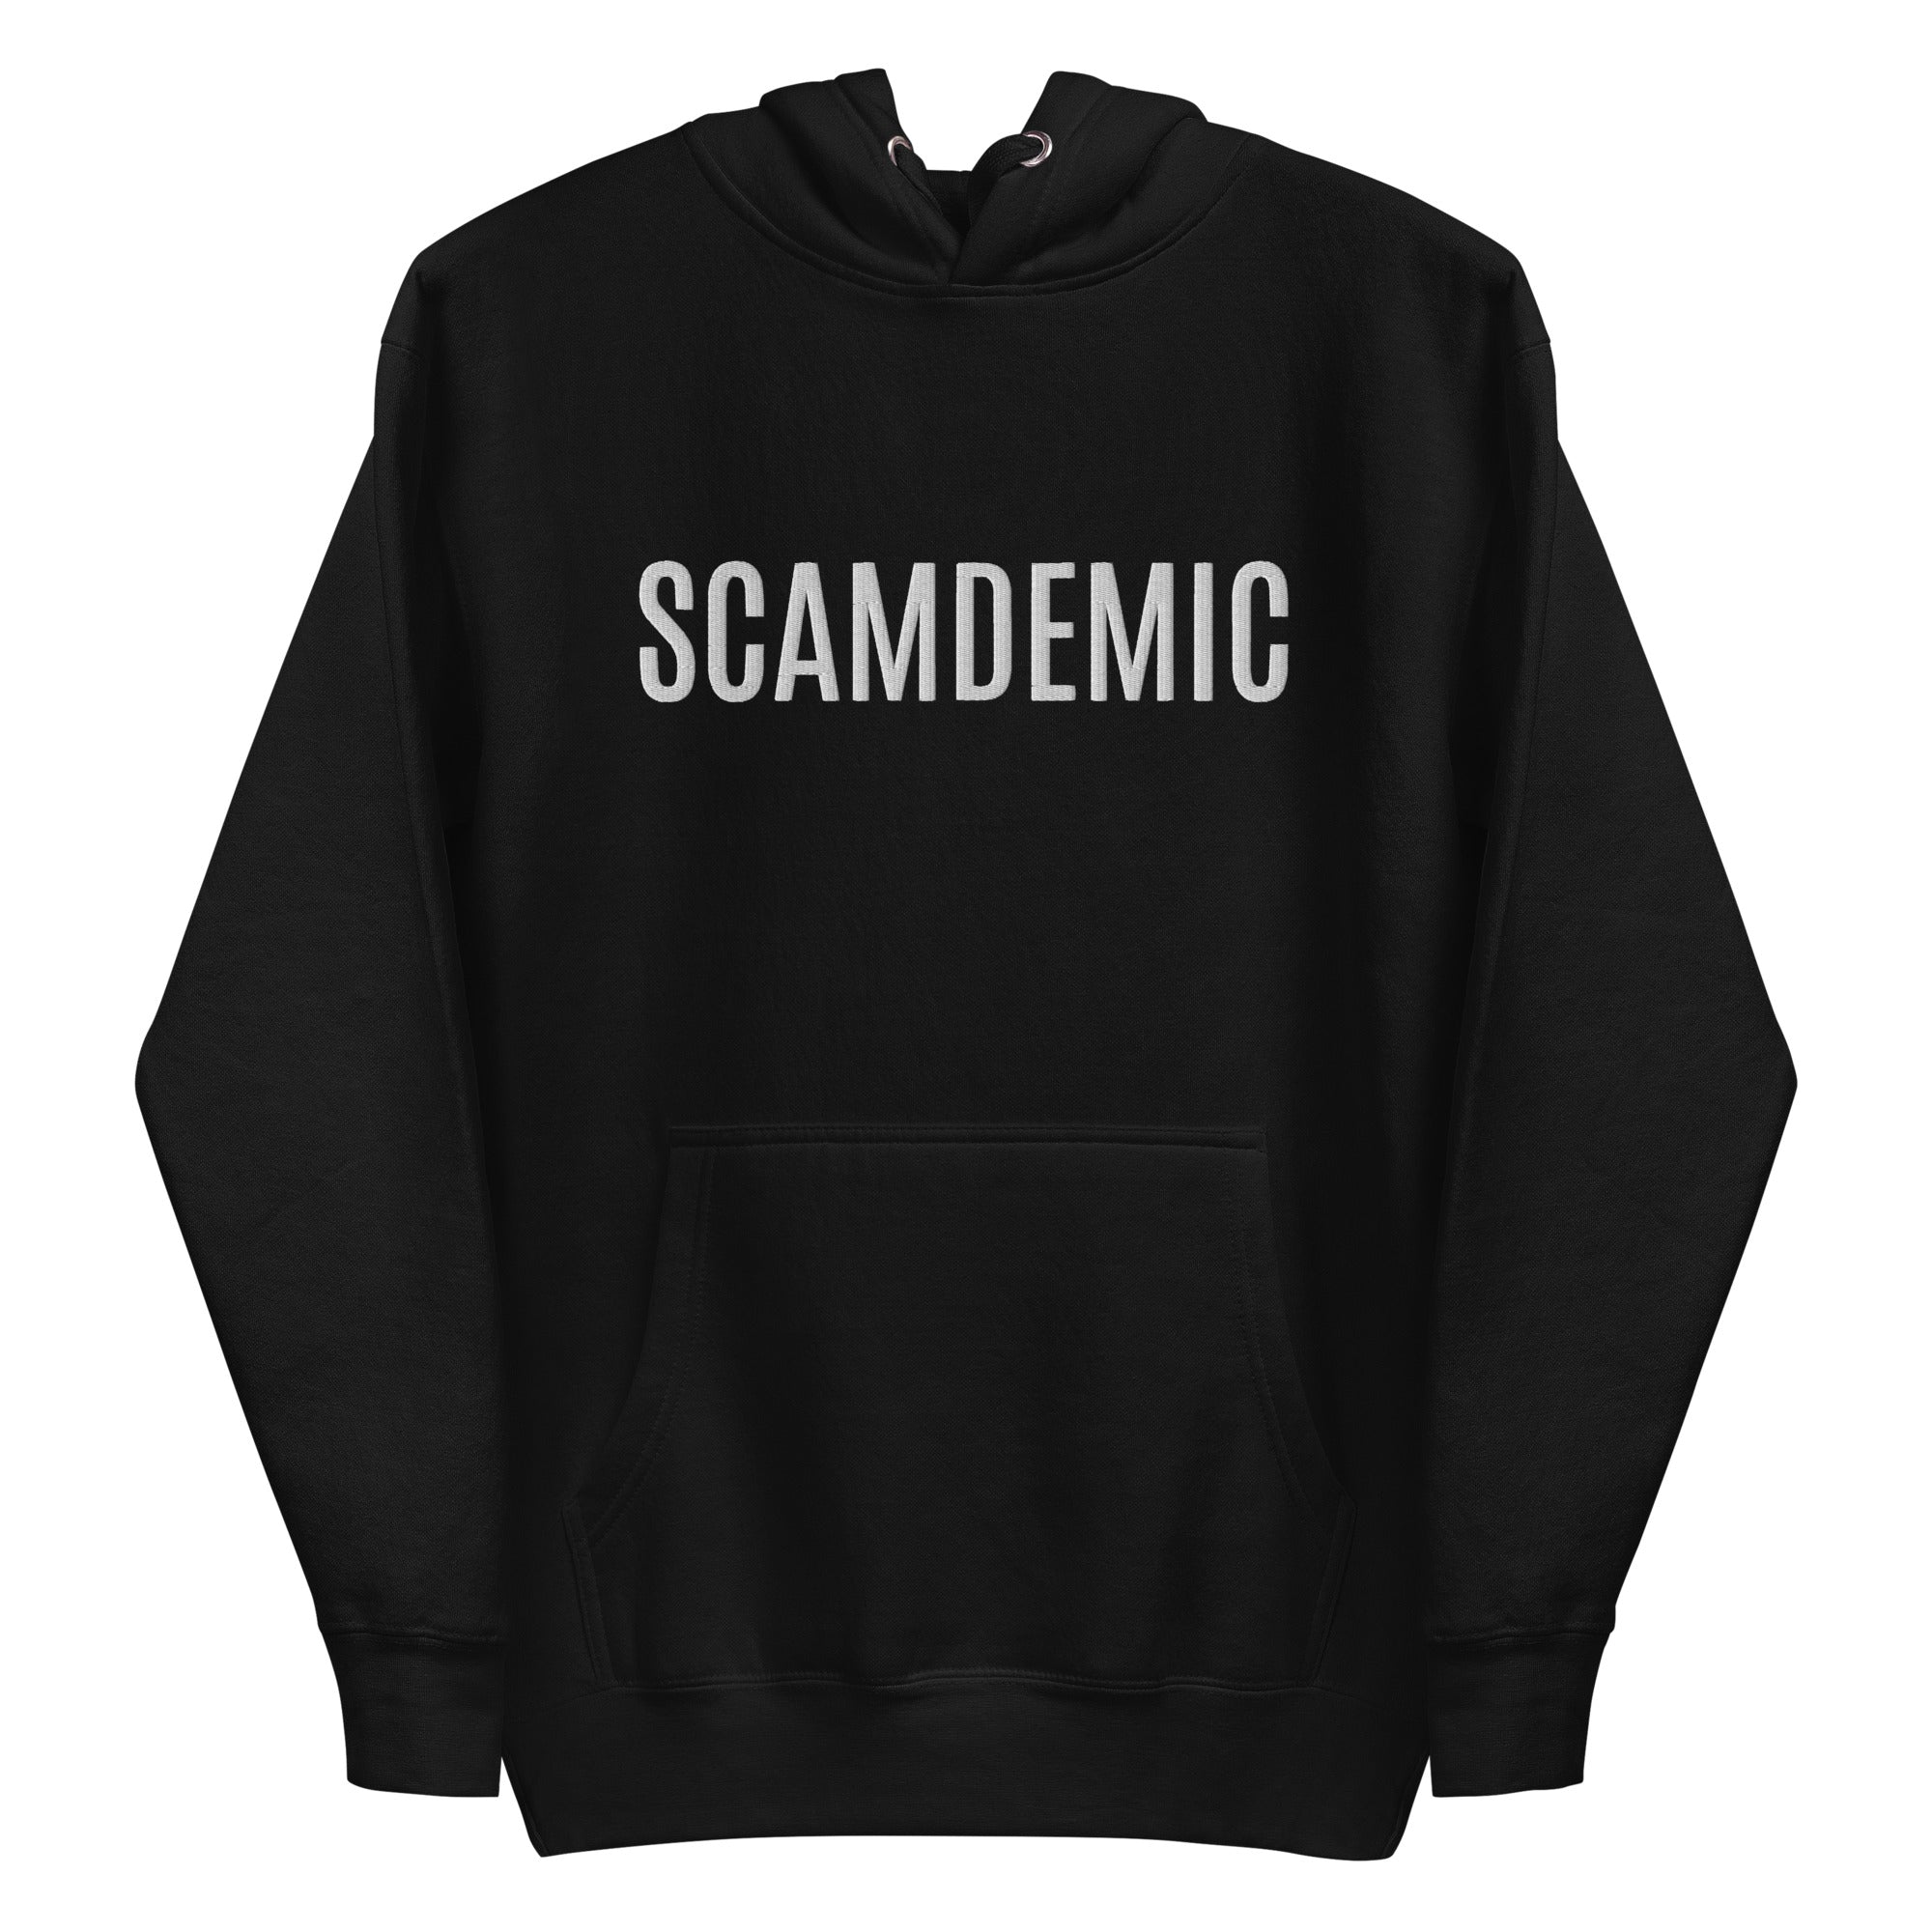 Scamdemic Embroidered Unisex Hoodie